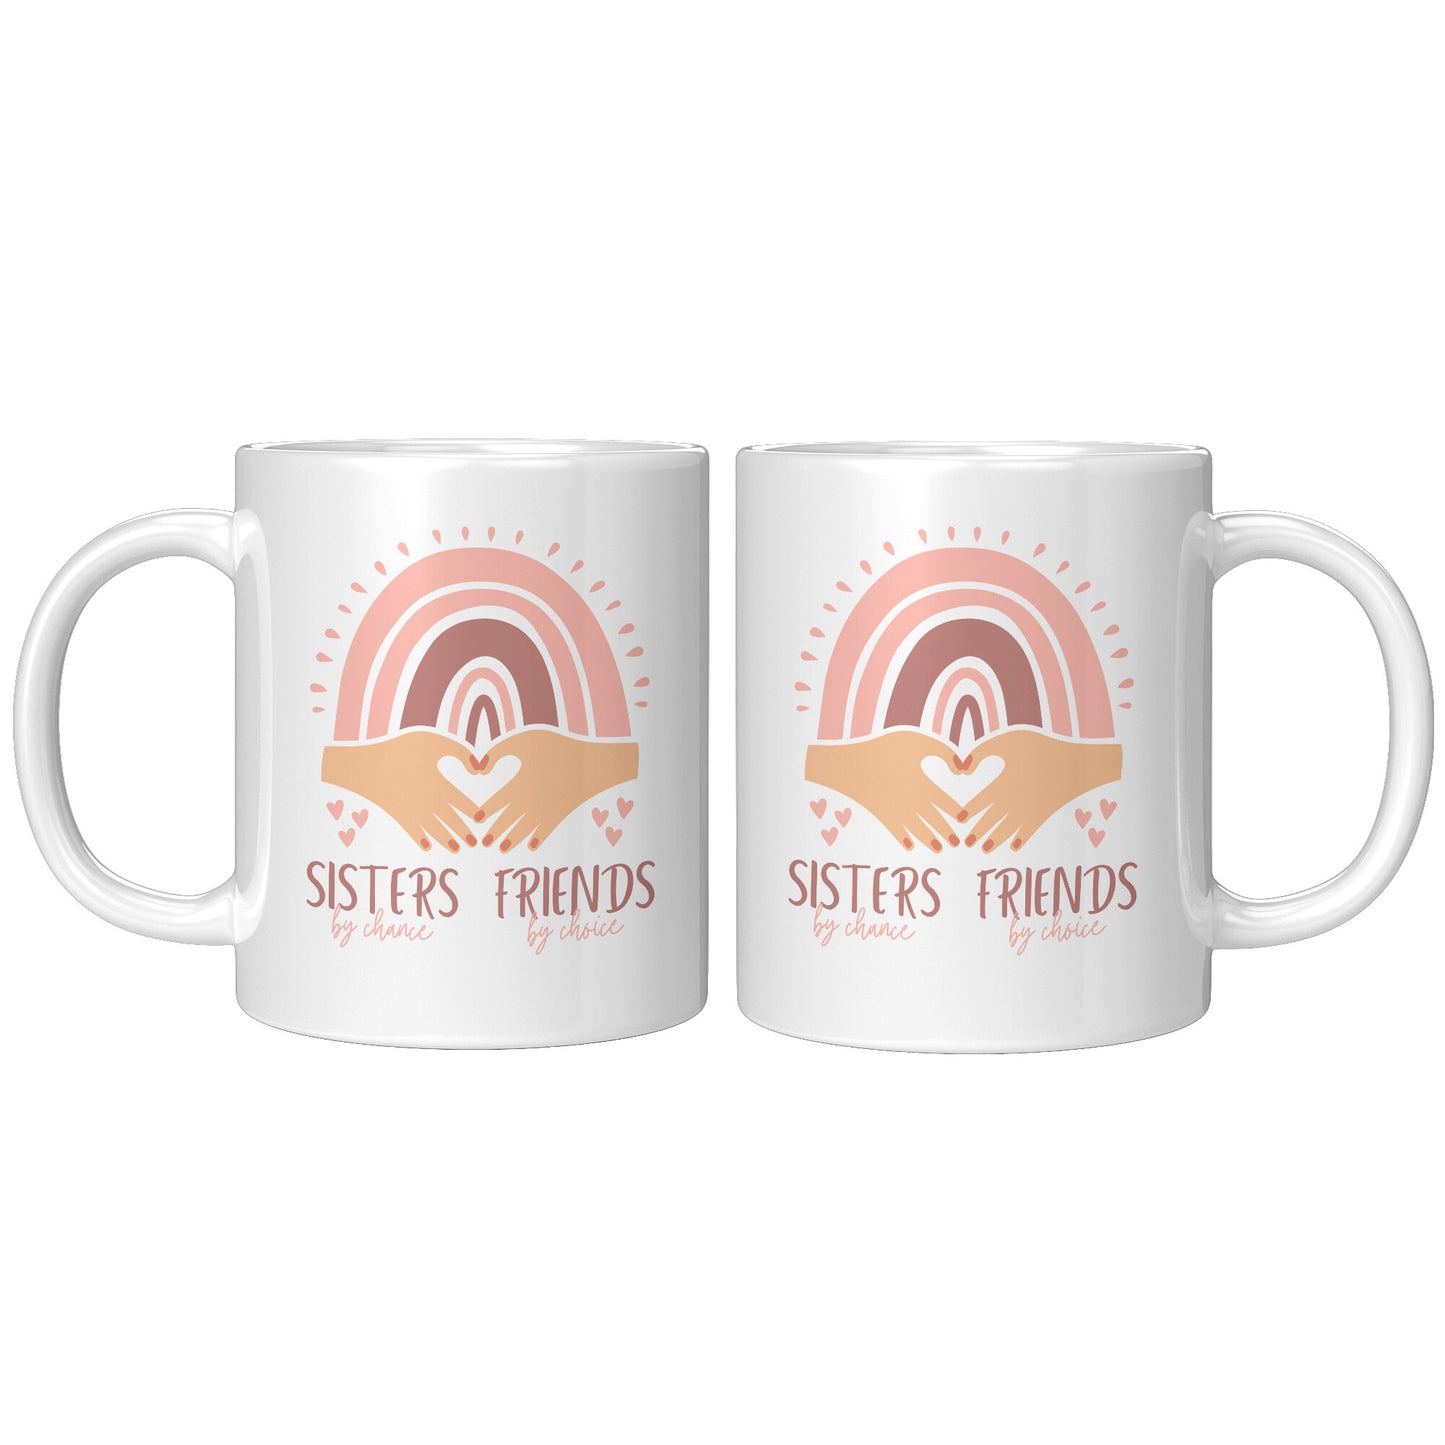 Sisters by Chance Friends by Choice 11oz White Mug